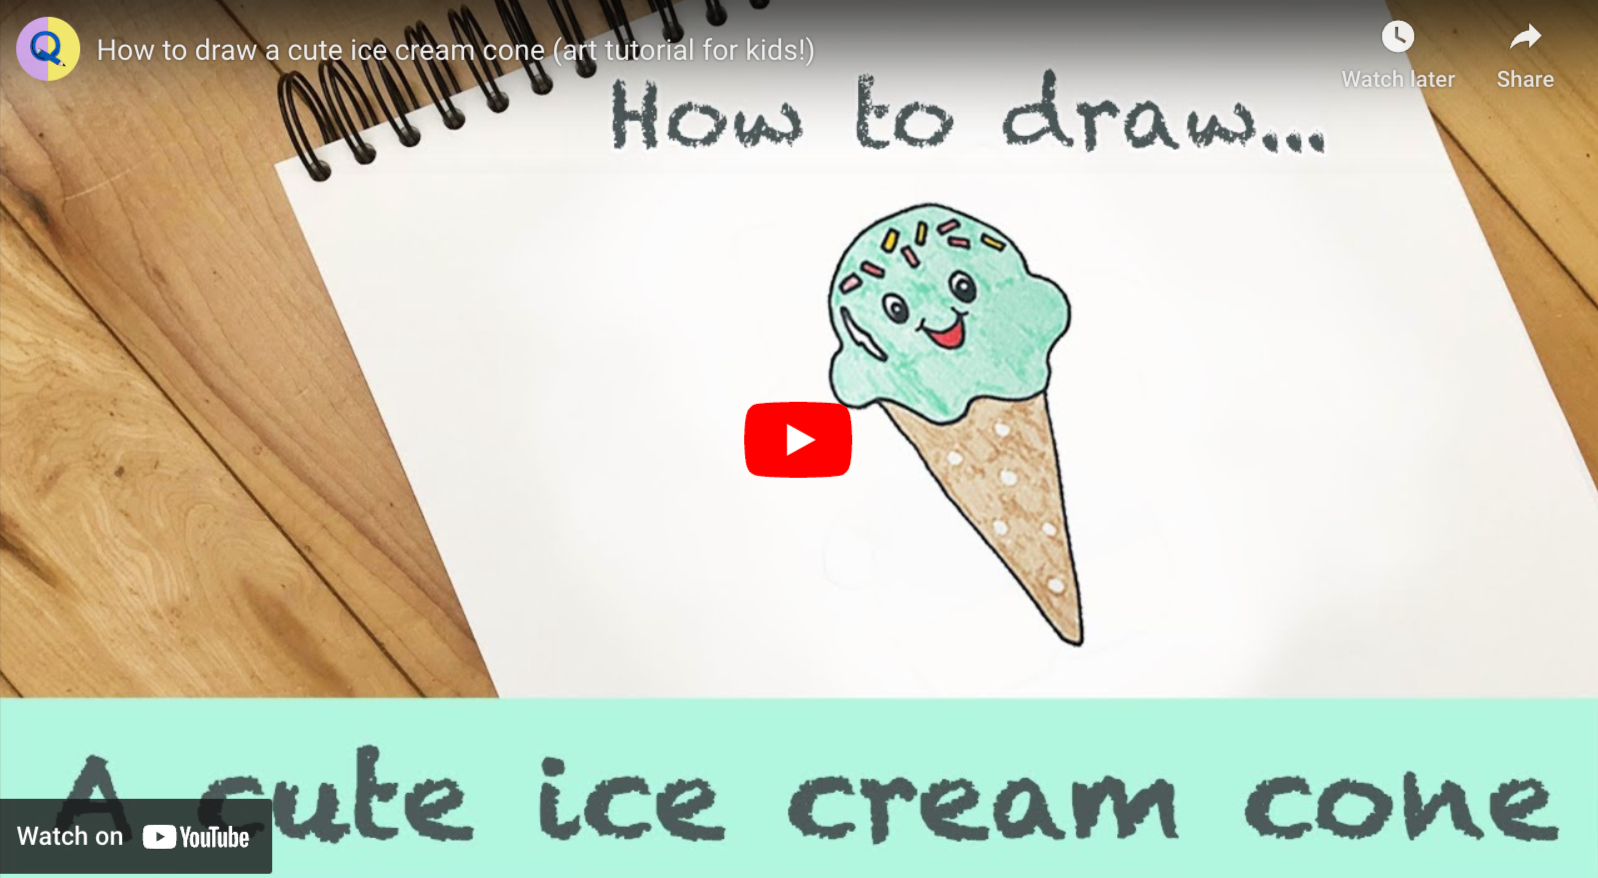 Load video: How to draw an ice cream cone video